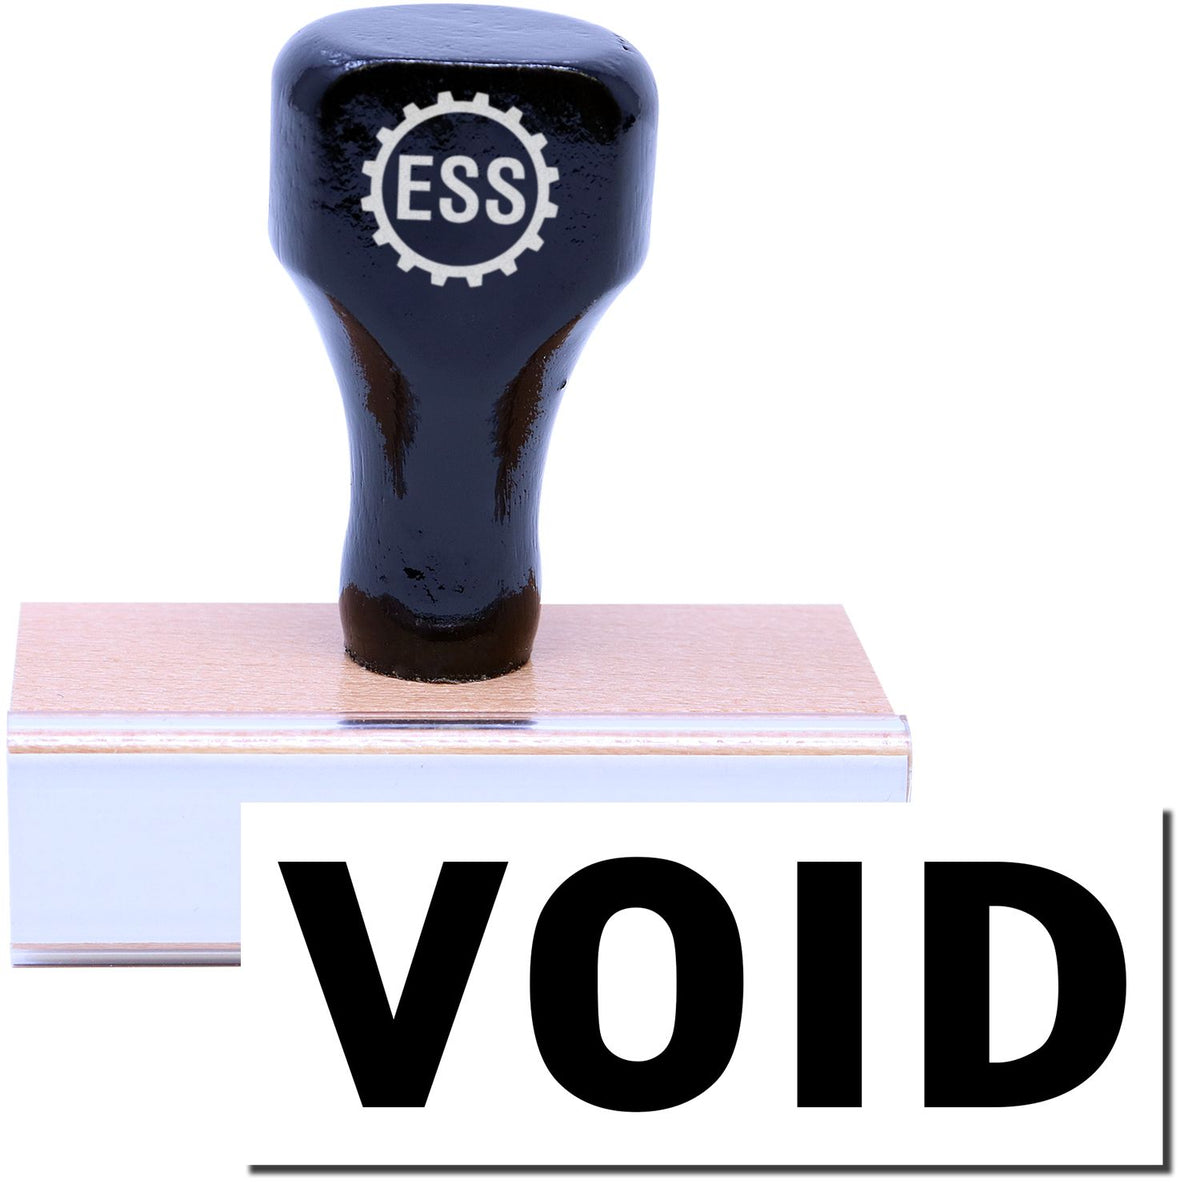 A stock office rubber stamp with a stamped image showing how the text &quot;VOID&quot; in a large font is displayed after stamping.